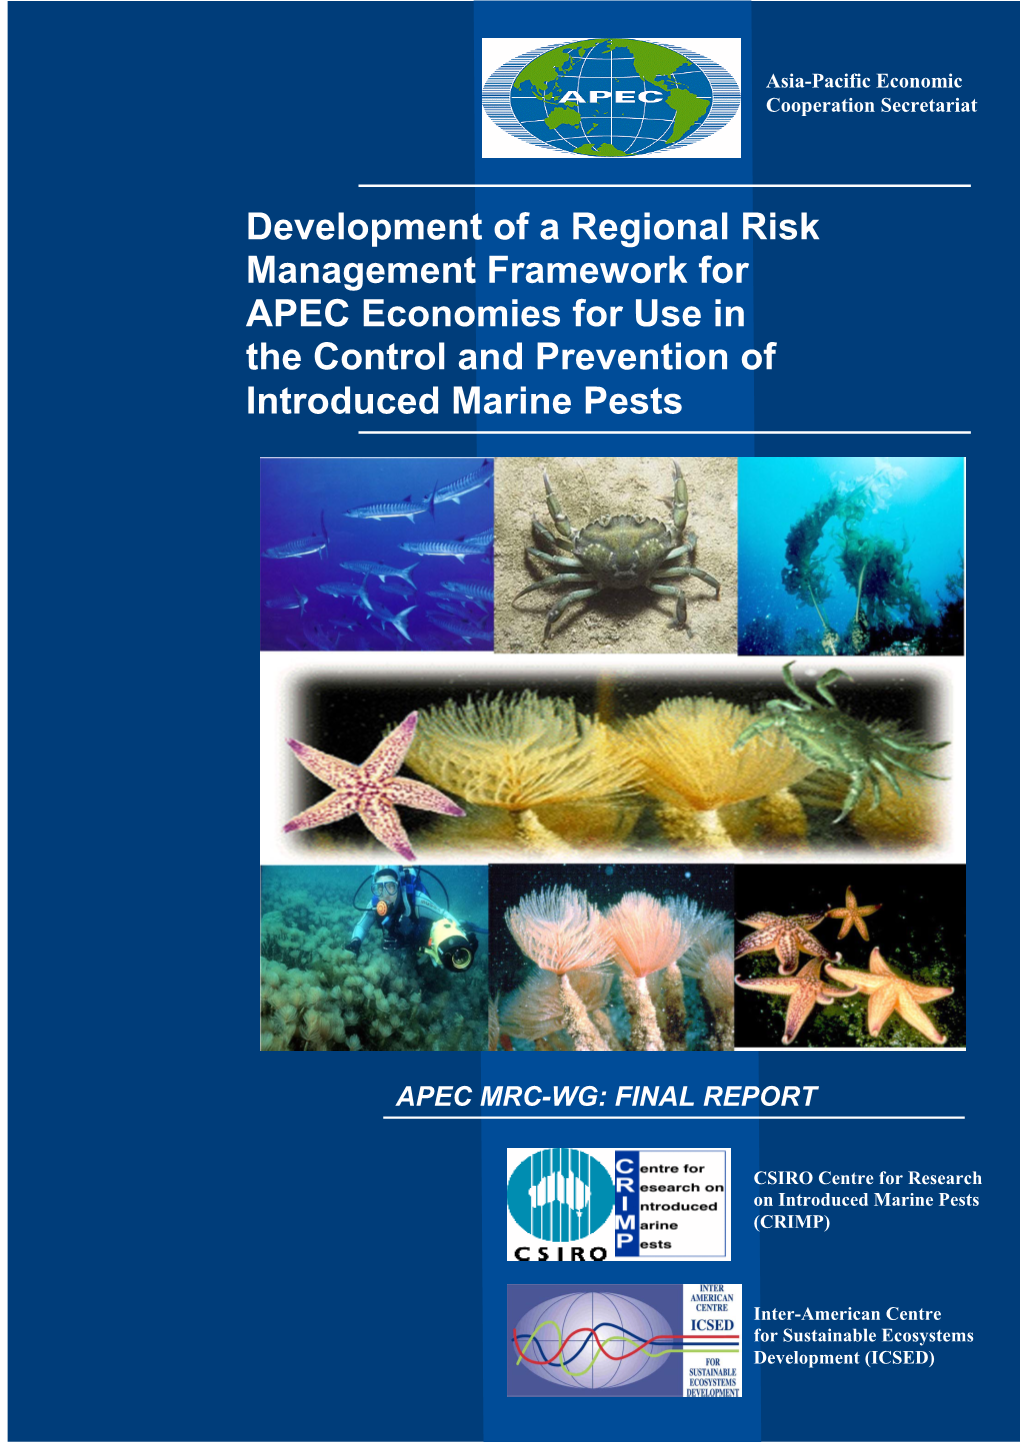 APEC Marine Resource Conservation Working Group Report